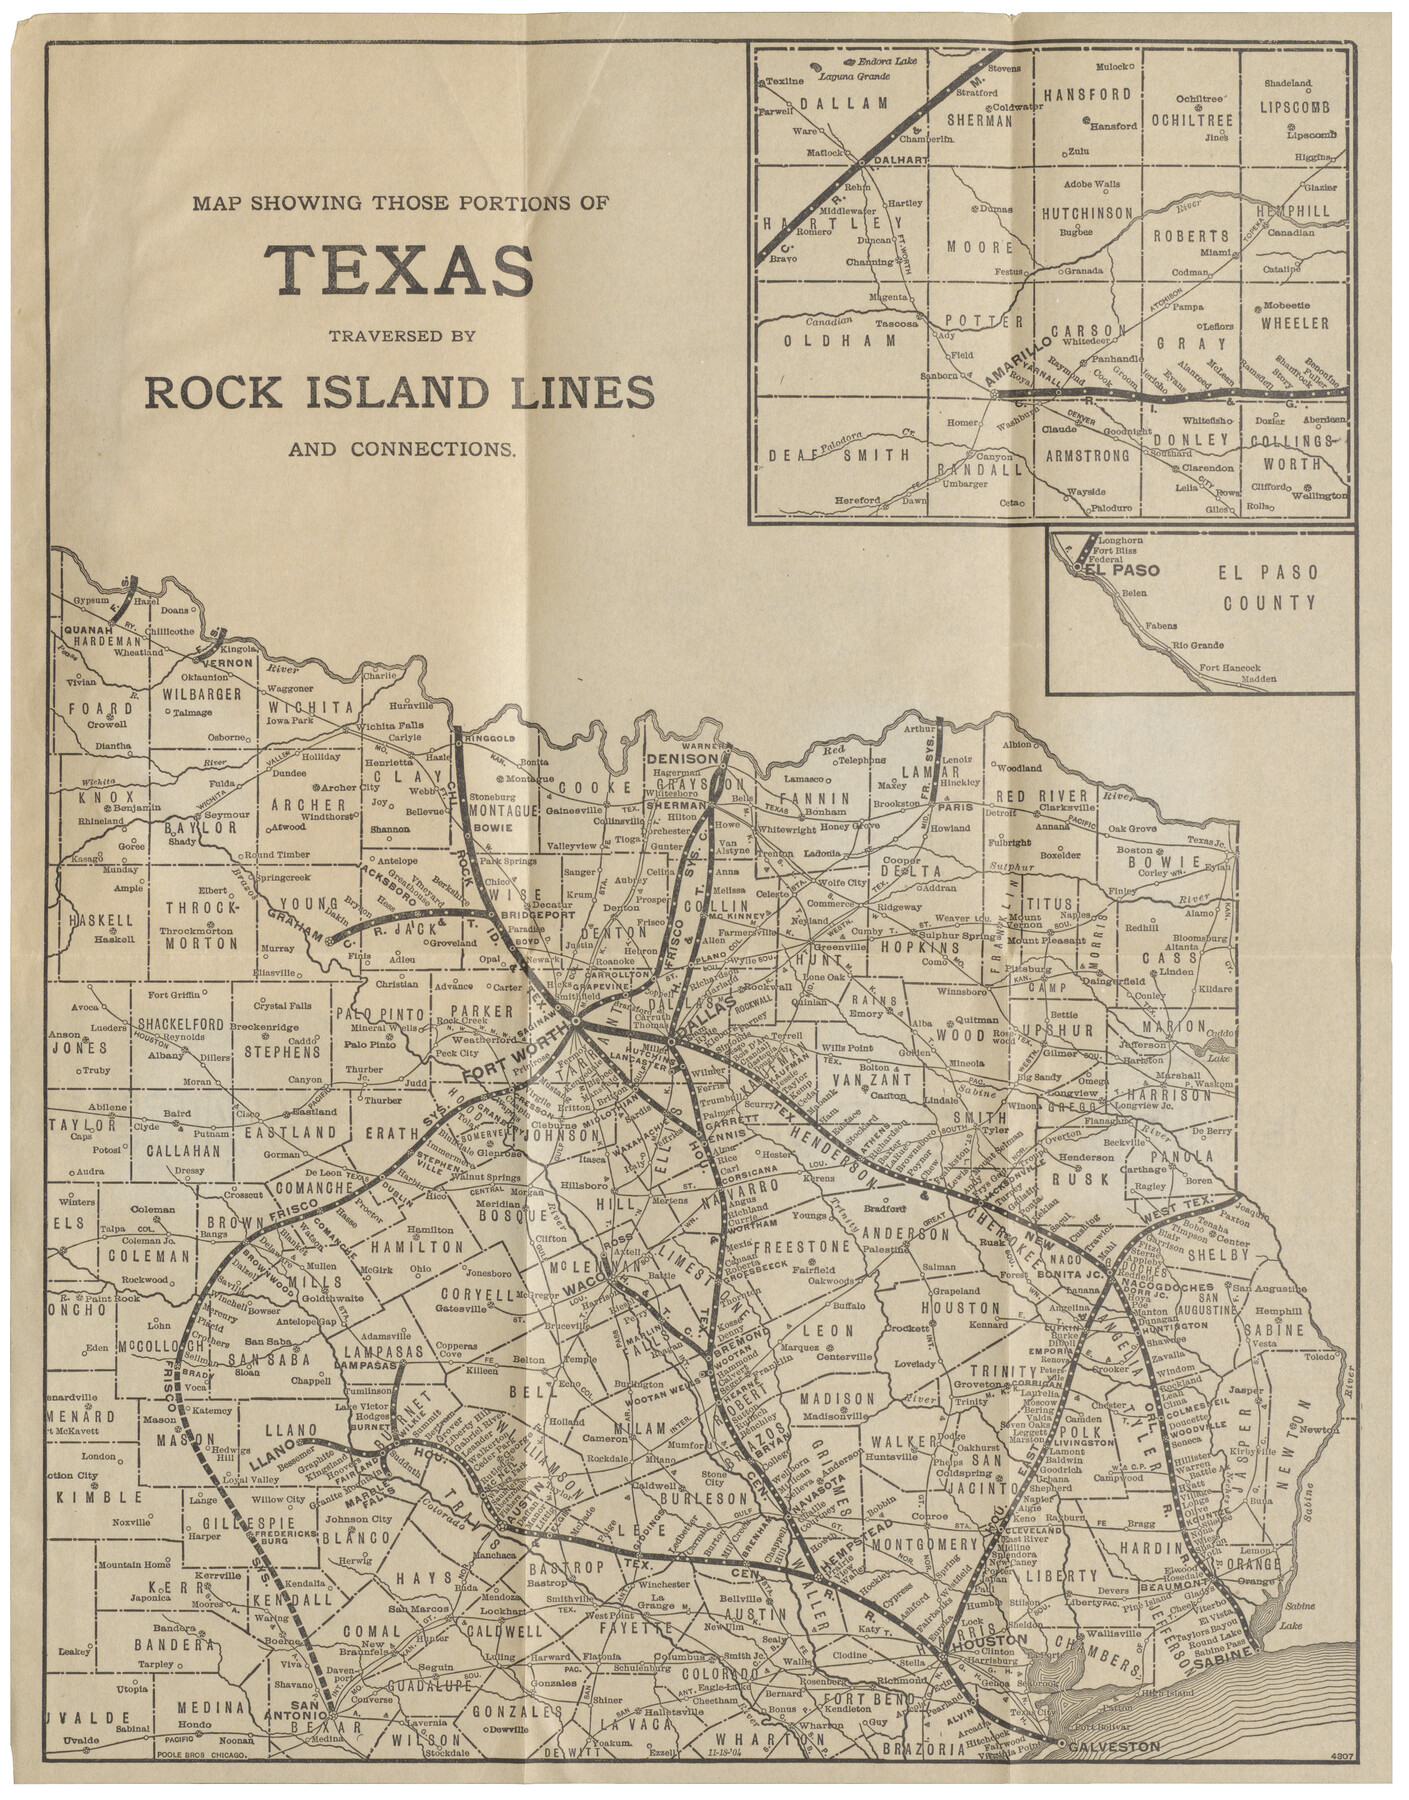 96588, Map showing those portions of Texas traversed by Rock Island Lines and connections, Cobb Digital Map Collection - 1